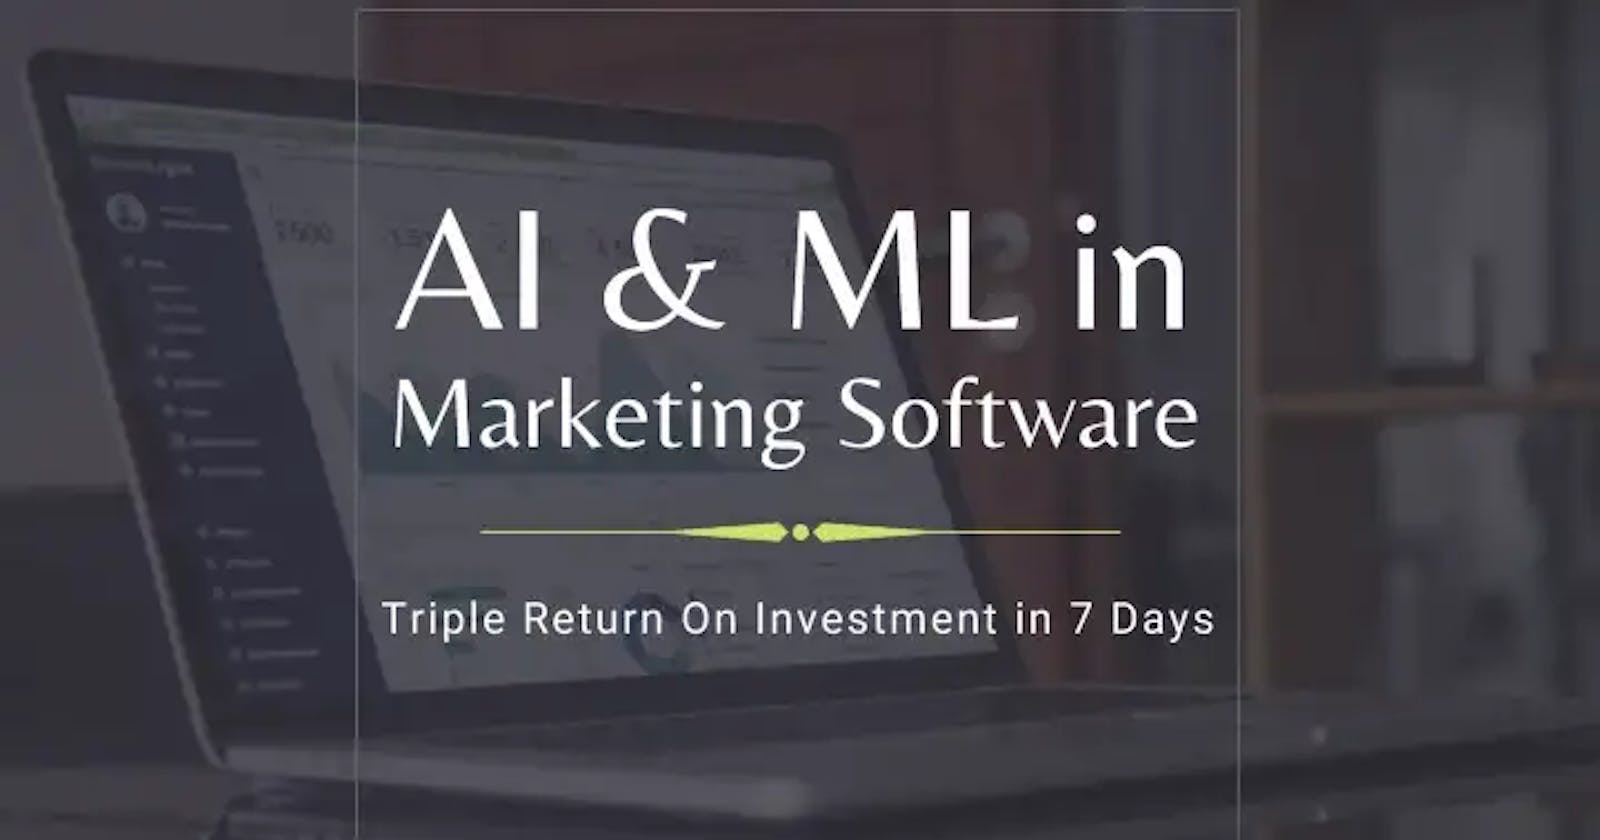 Get 3x Better ROI Using AI & ML in Marketing Software 💰